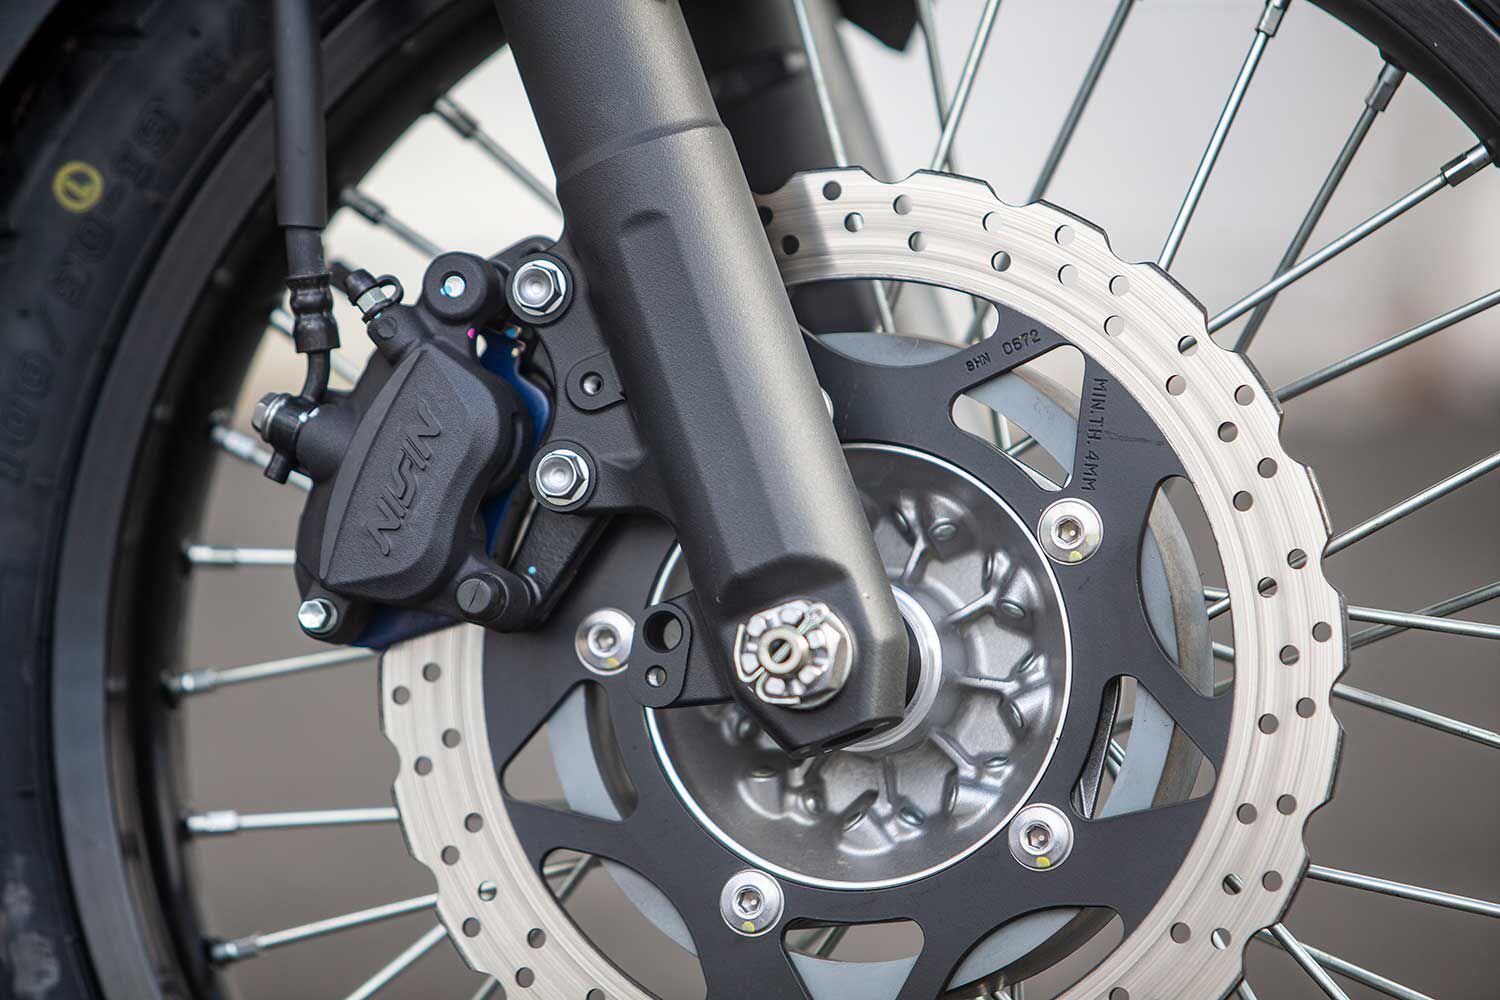 Bringing the Versys to a halt is a single two-piston Nissin caliper up front. While providing acceptable stopping power, the lever lacks feel.